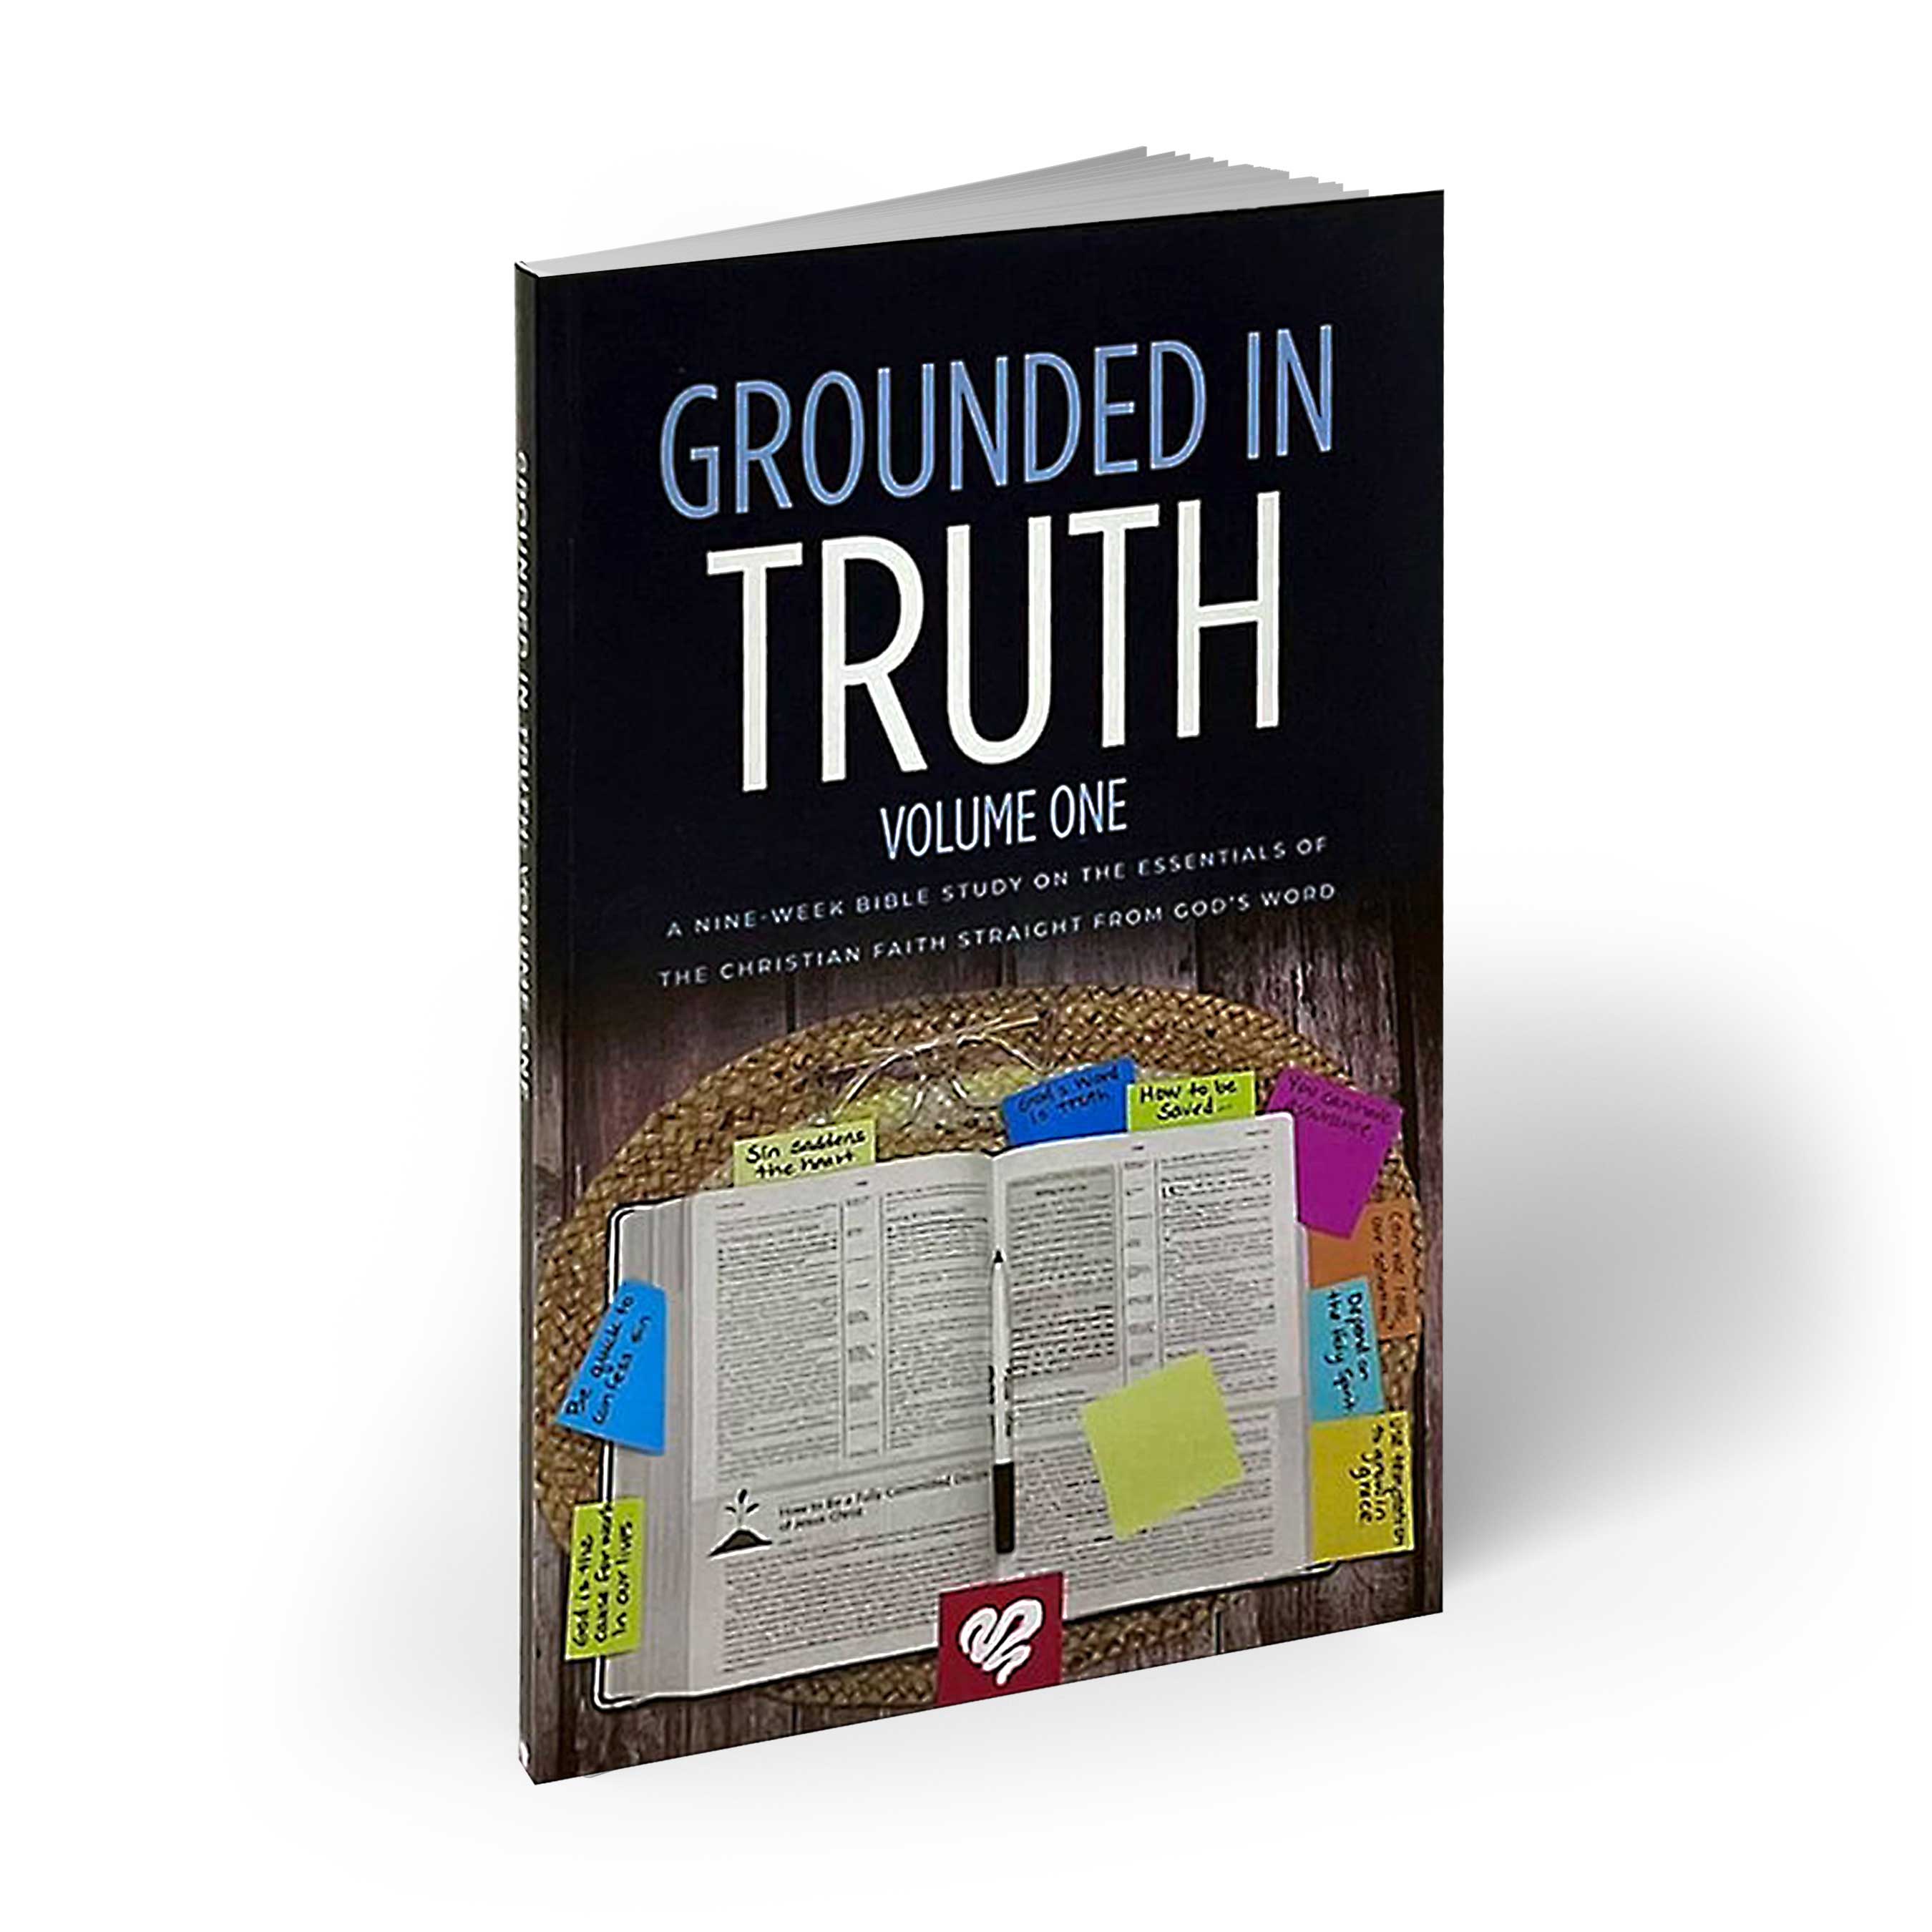 Grounded in Truth Volume 2 Bible Study